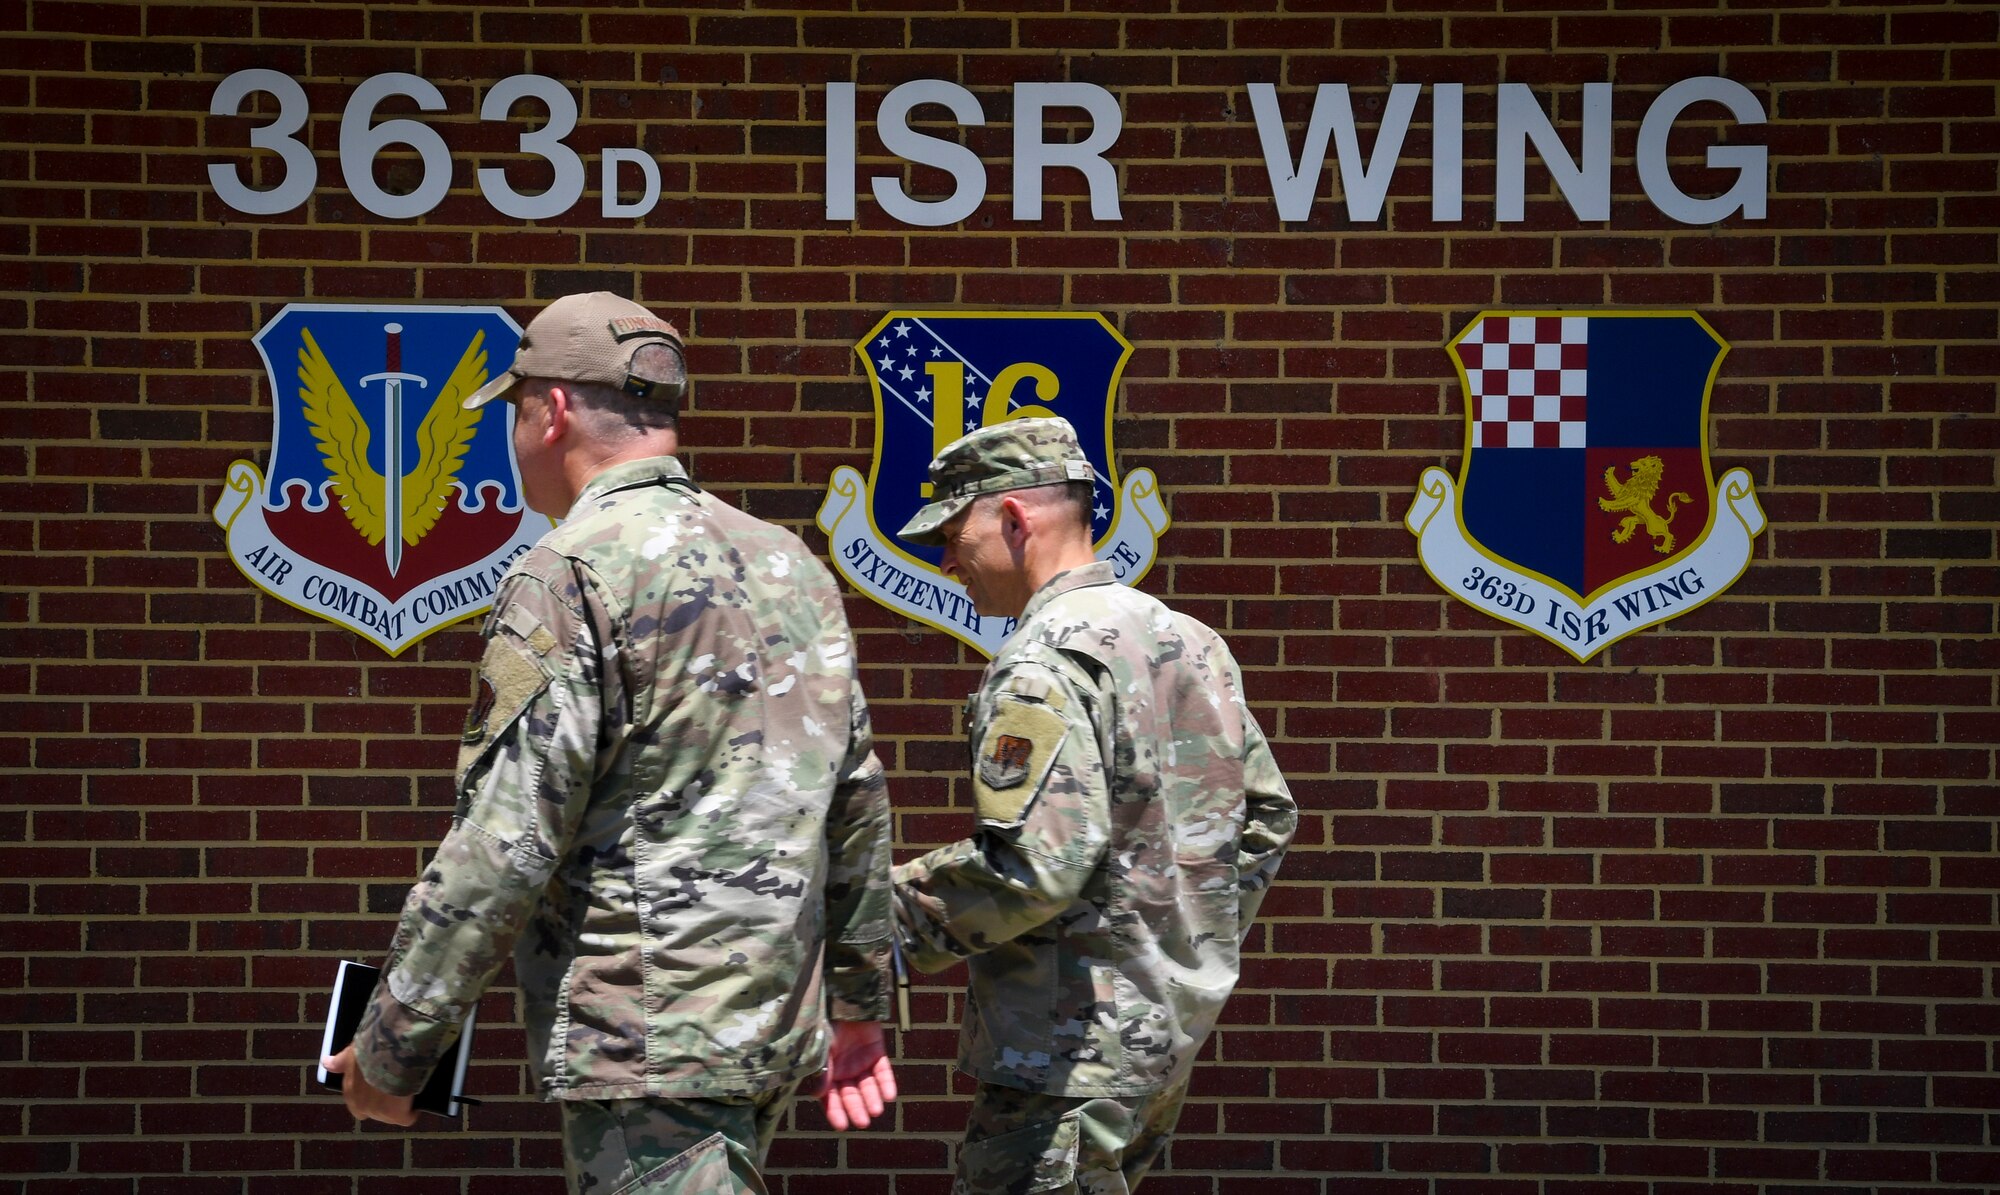 Two individuals walk in front of the 363d ISR Wing emblem.